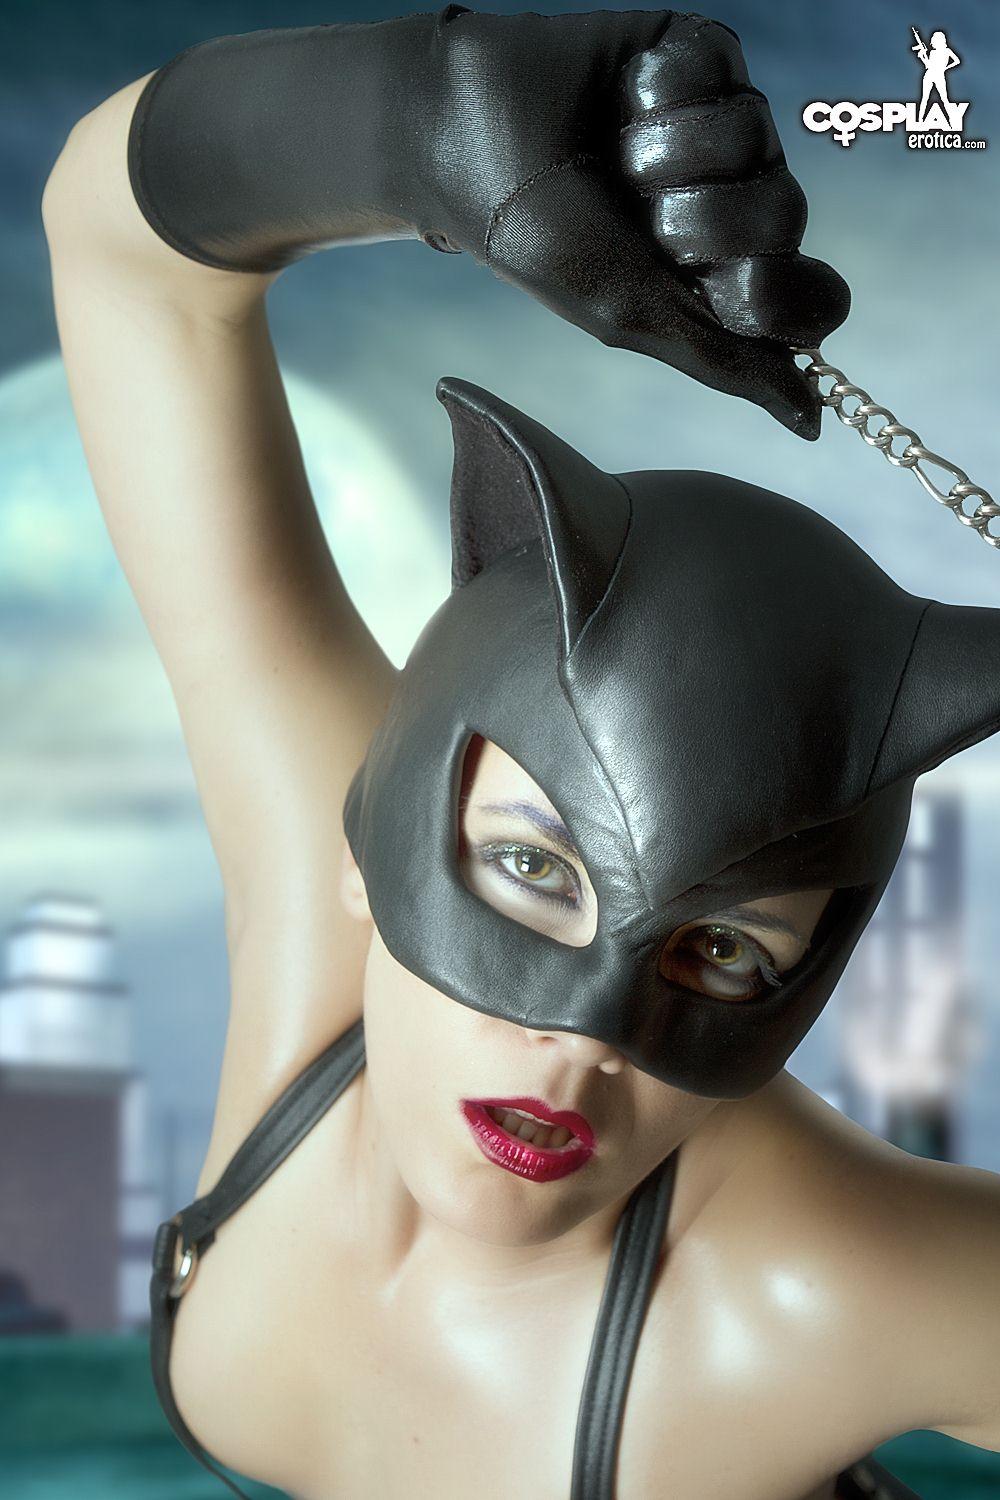 Cosplayer Gogo dresses up as Catwoman #54560659